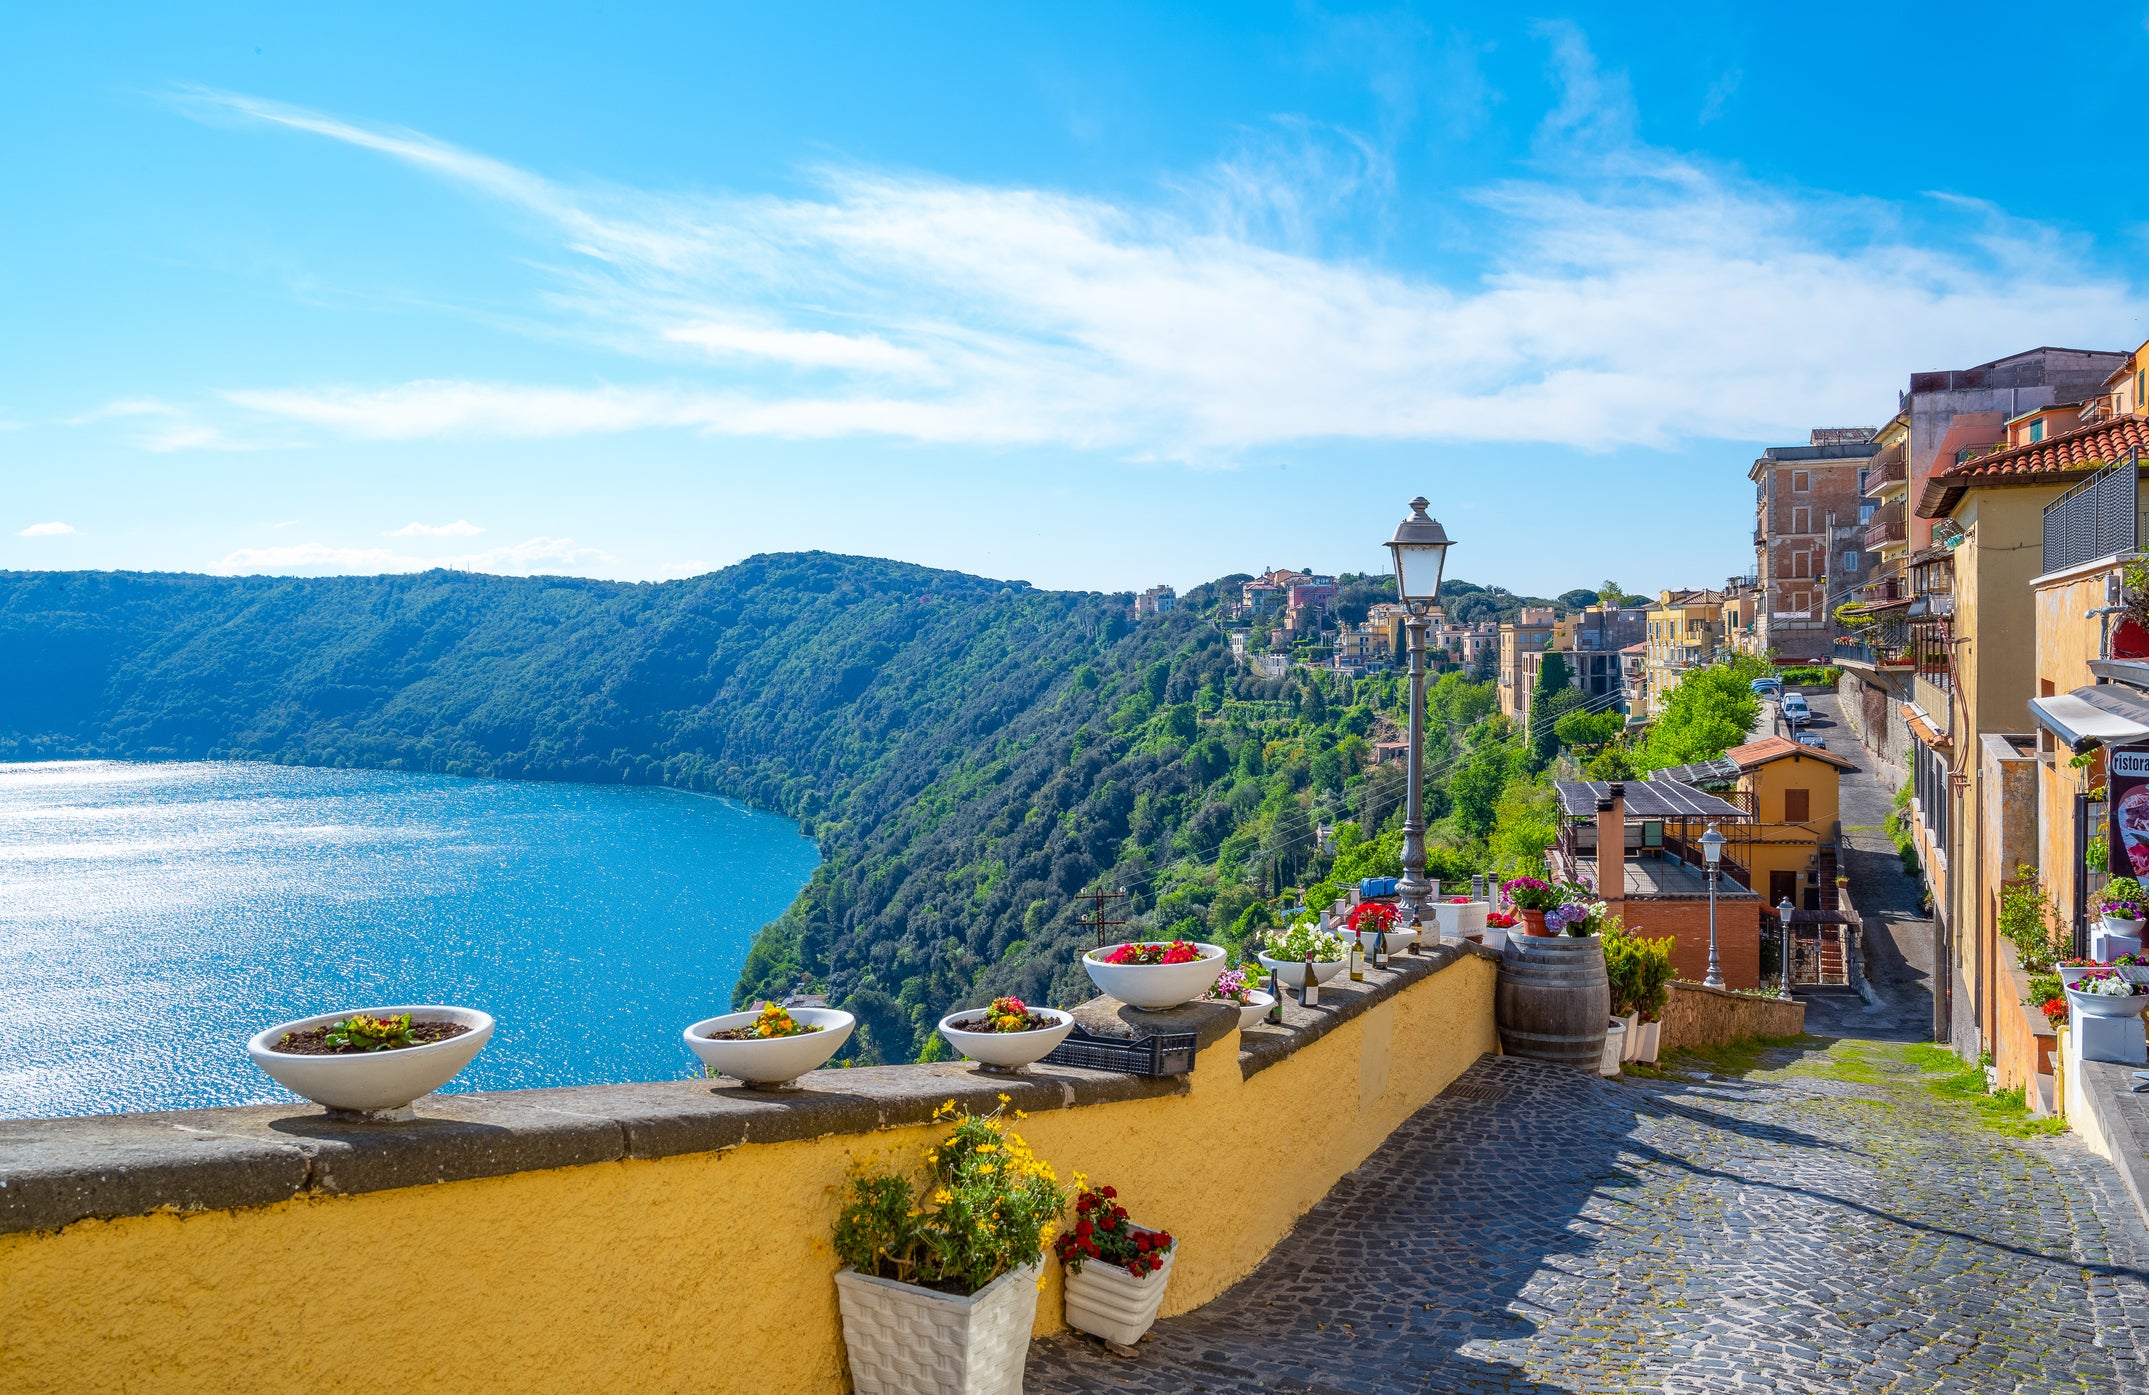 From Castel Gandolfo there are panoramic views of Lake Albano